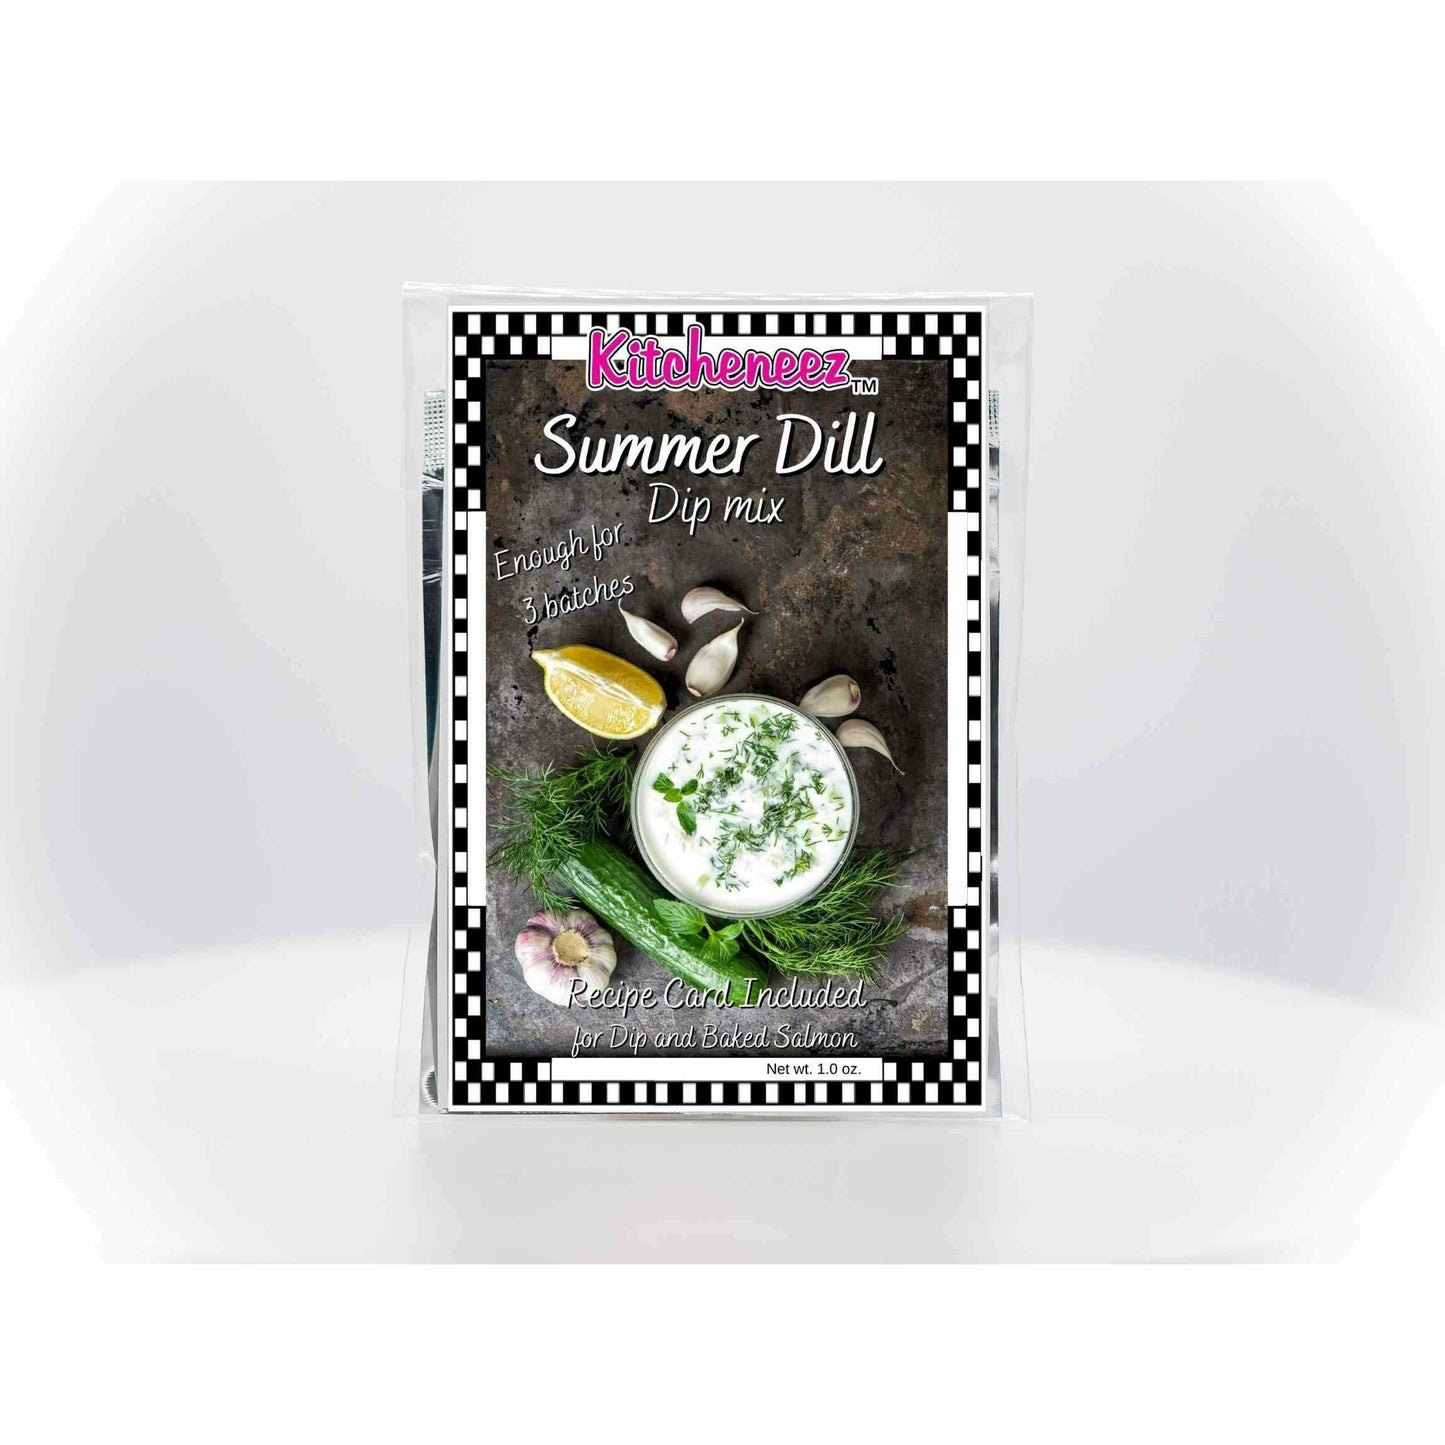 Summer Dill dip mix (with bonus recipe for Baked Salmon)